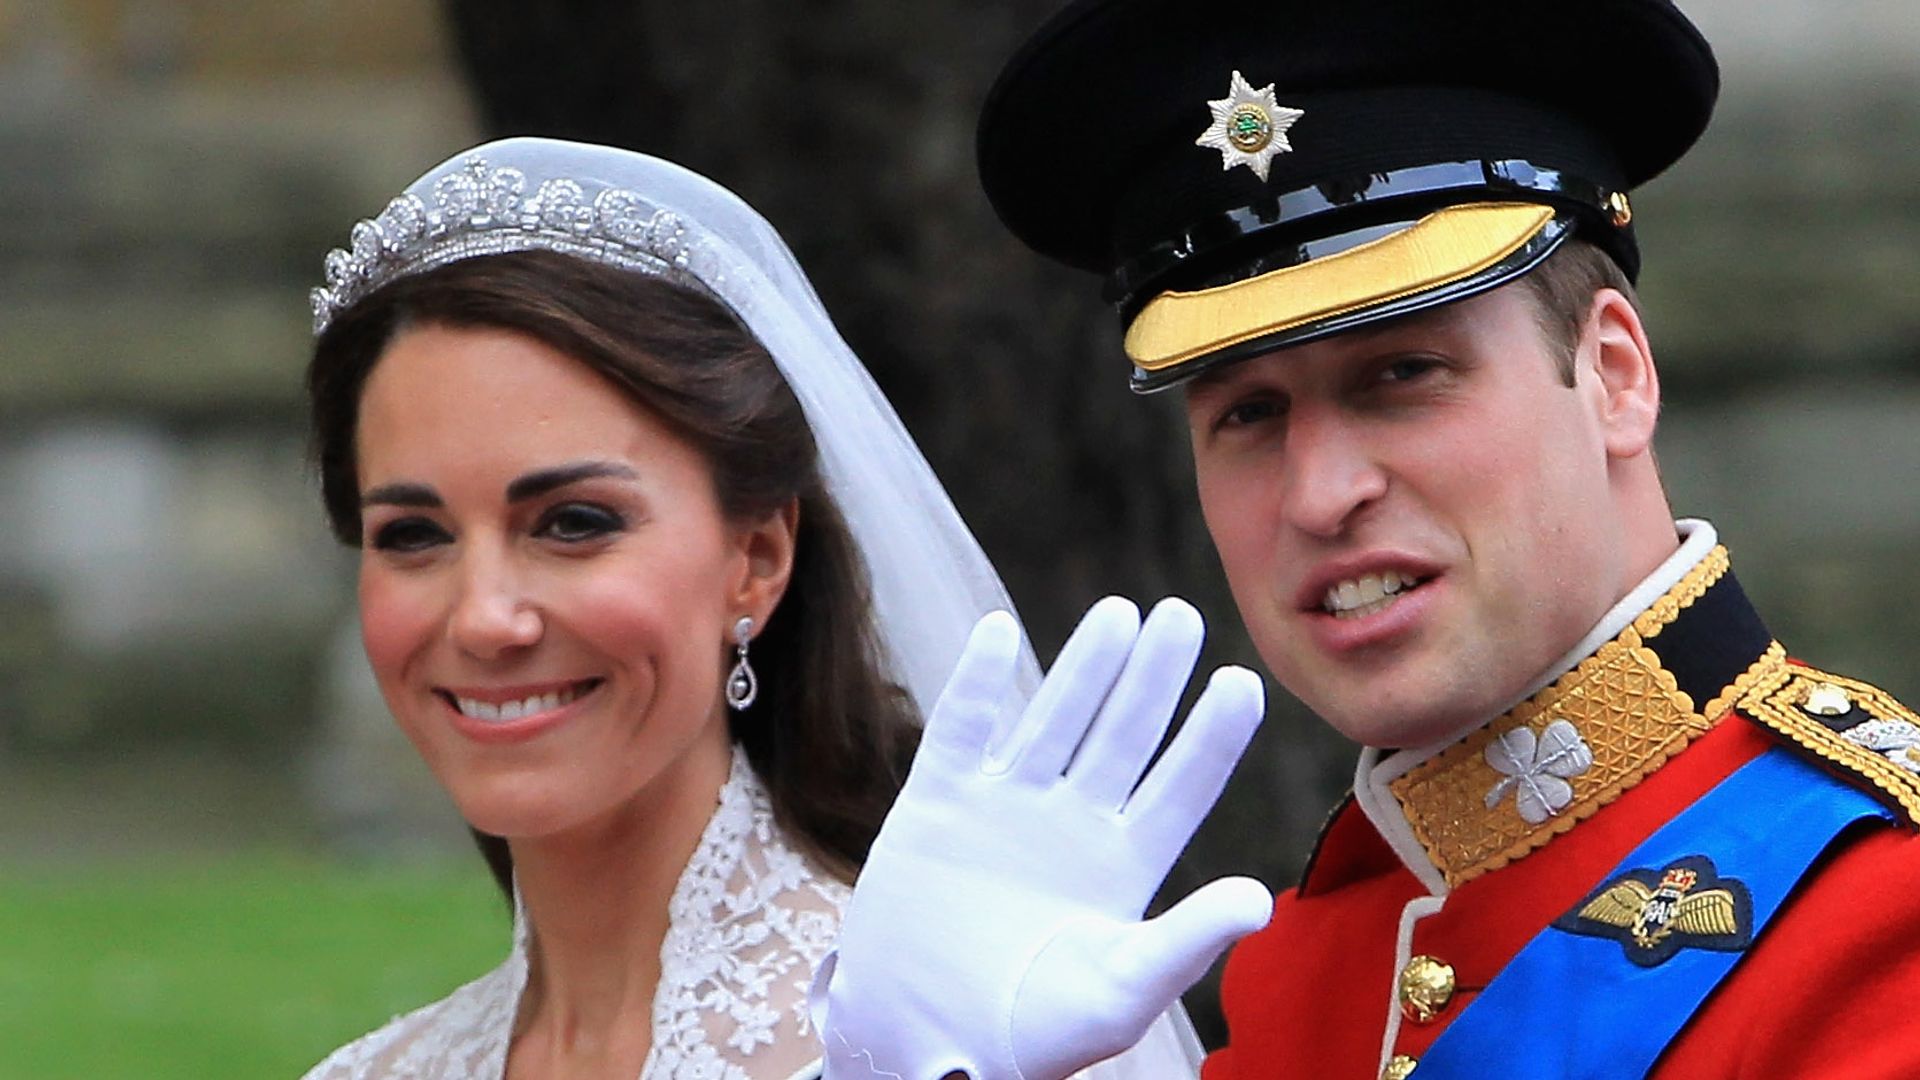 Prince William and Kate Middleton waving to crowds following their royal wedding in 2011